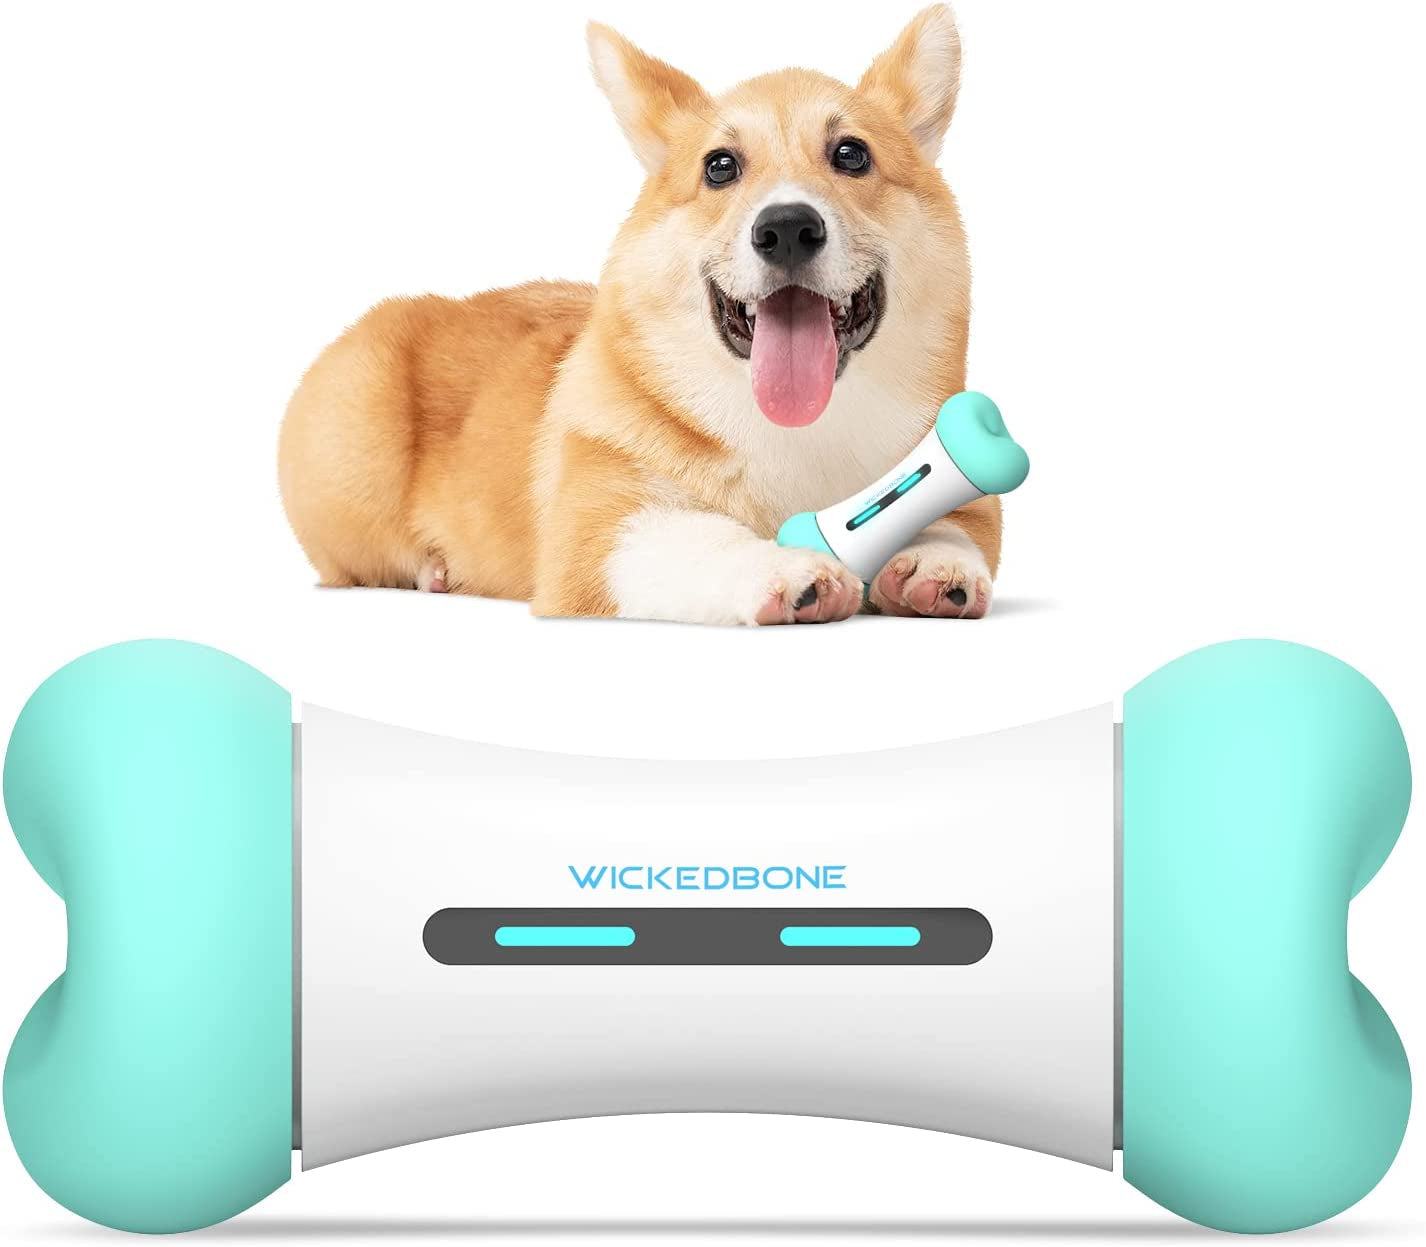 Wickedbone Smart Interactive Dog Toy, Automatic Moving Bouncing Rolling Toy Bone Shape, App Remote Control Pet Toy for Dog & Puppy, Mint